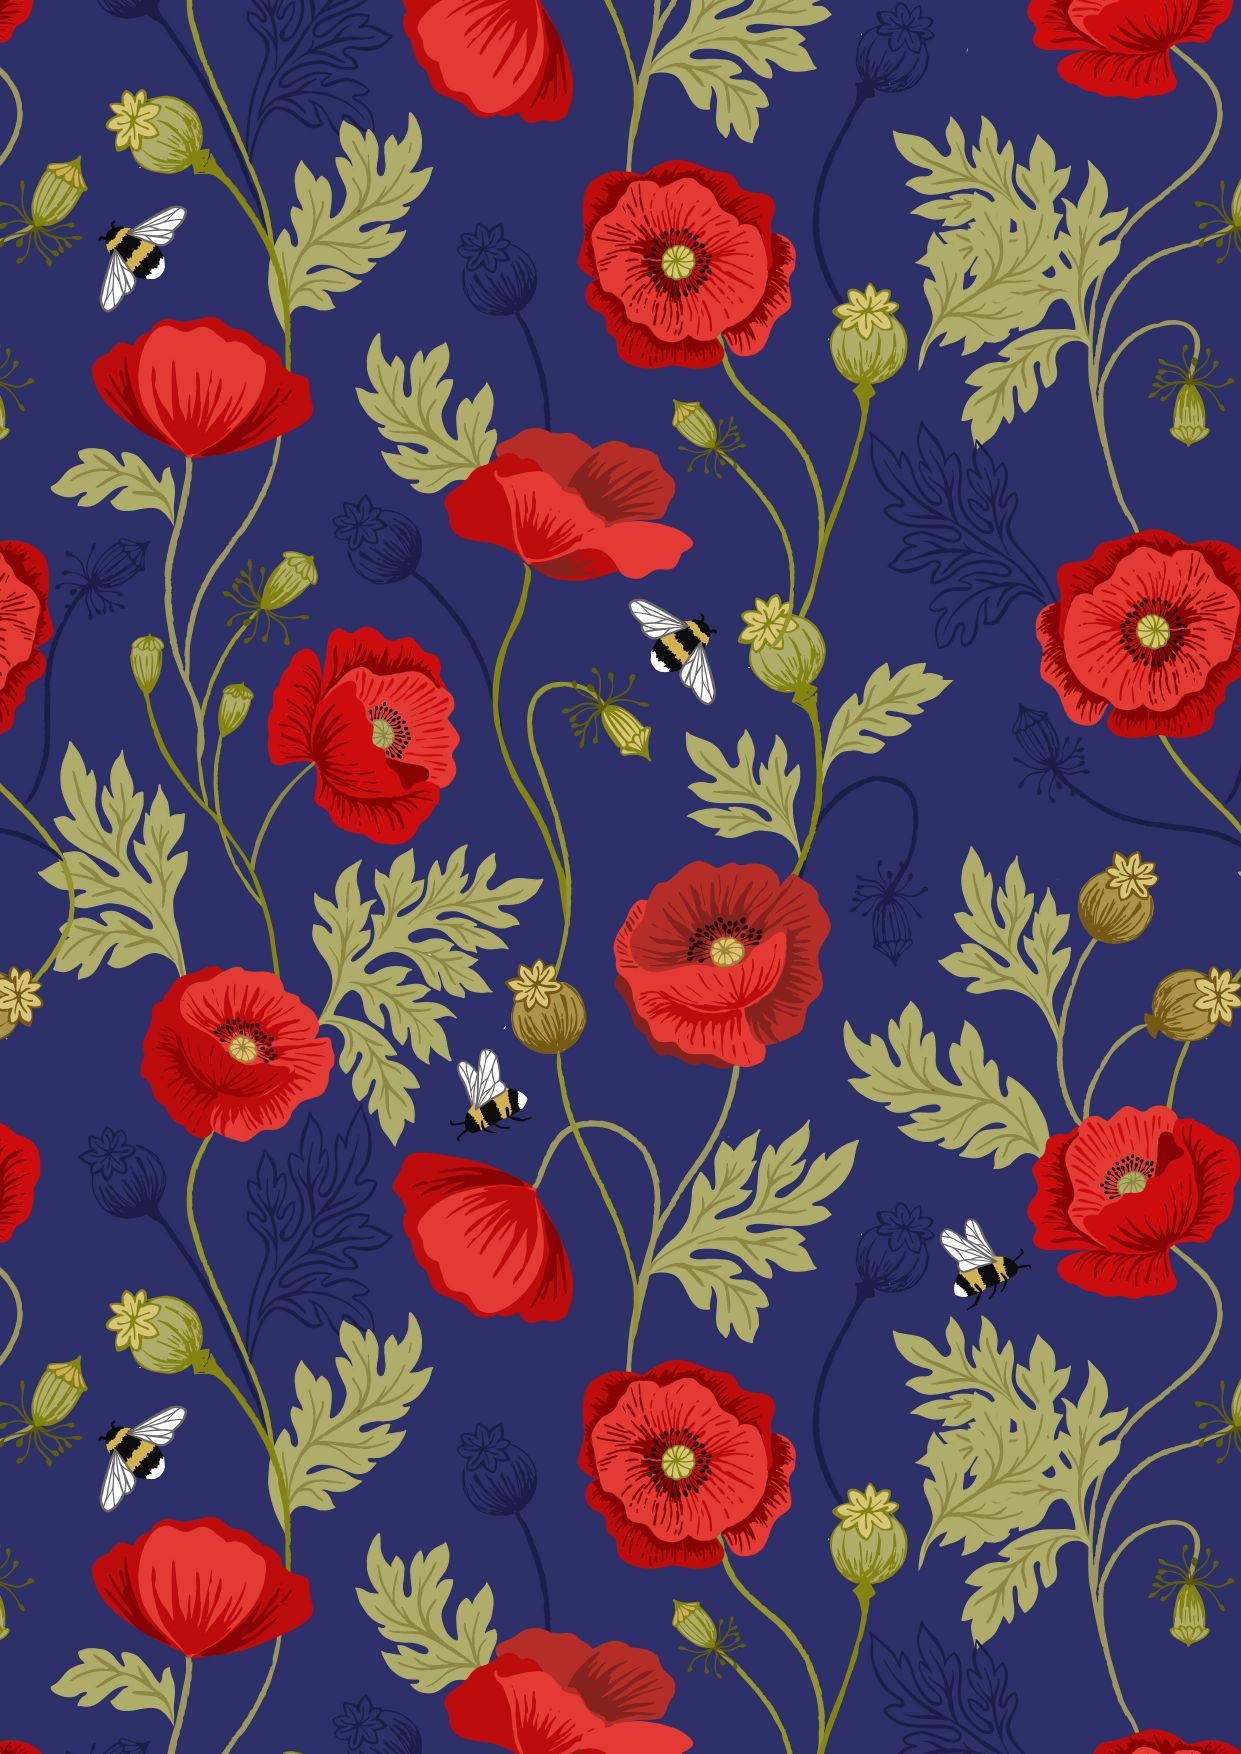 Lewis & Irene - Poppies - A553.2 - Poppy & Bee on Blue Fabric